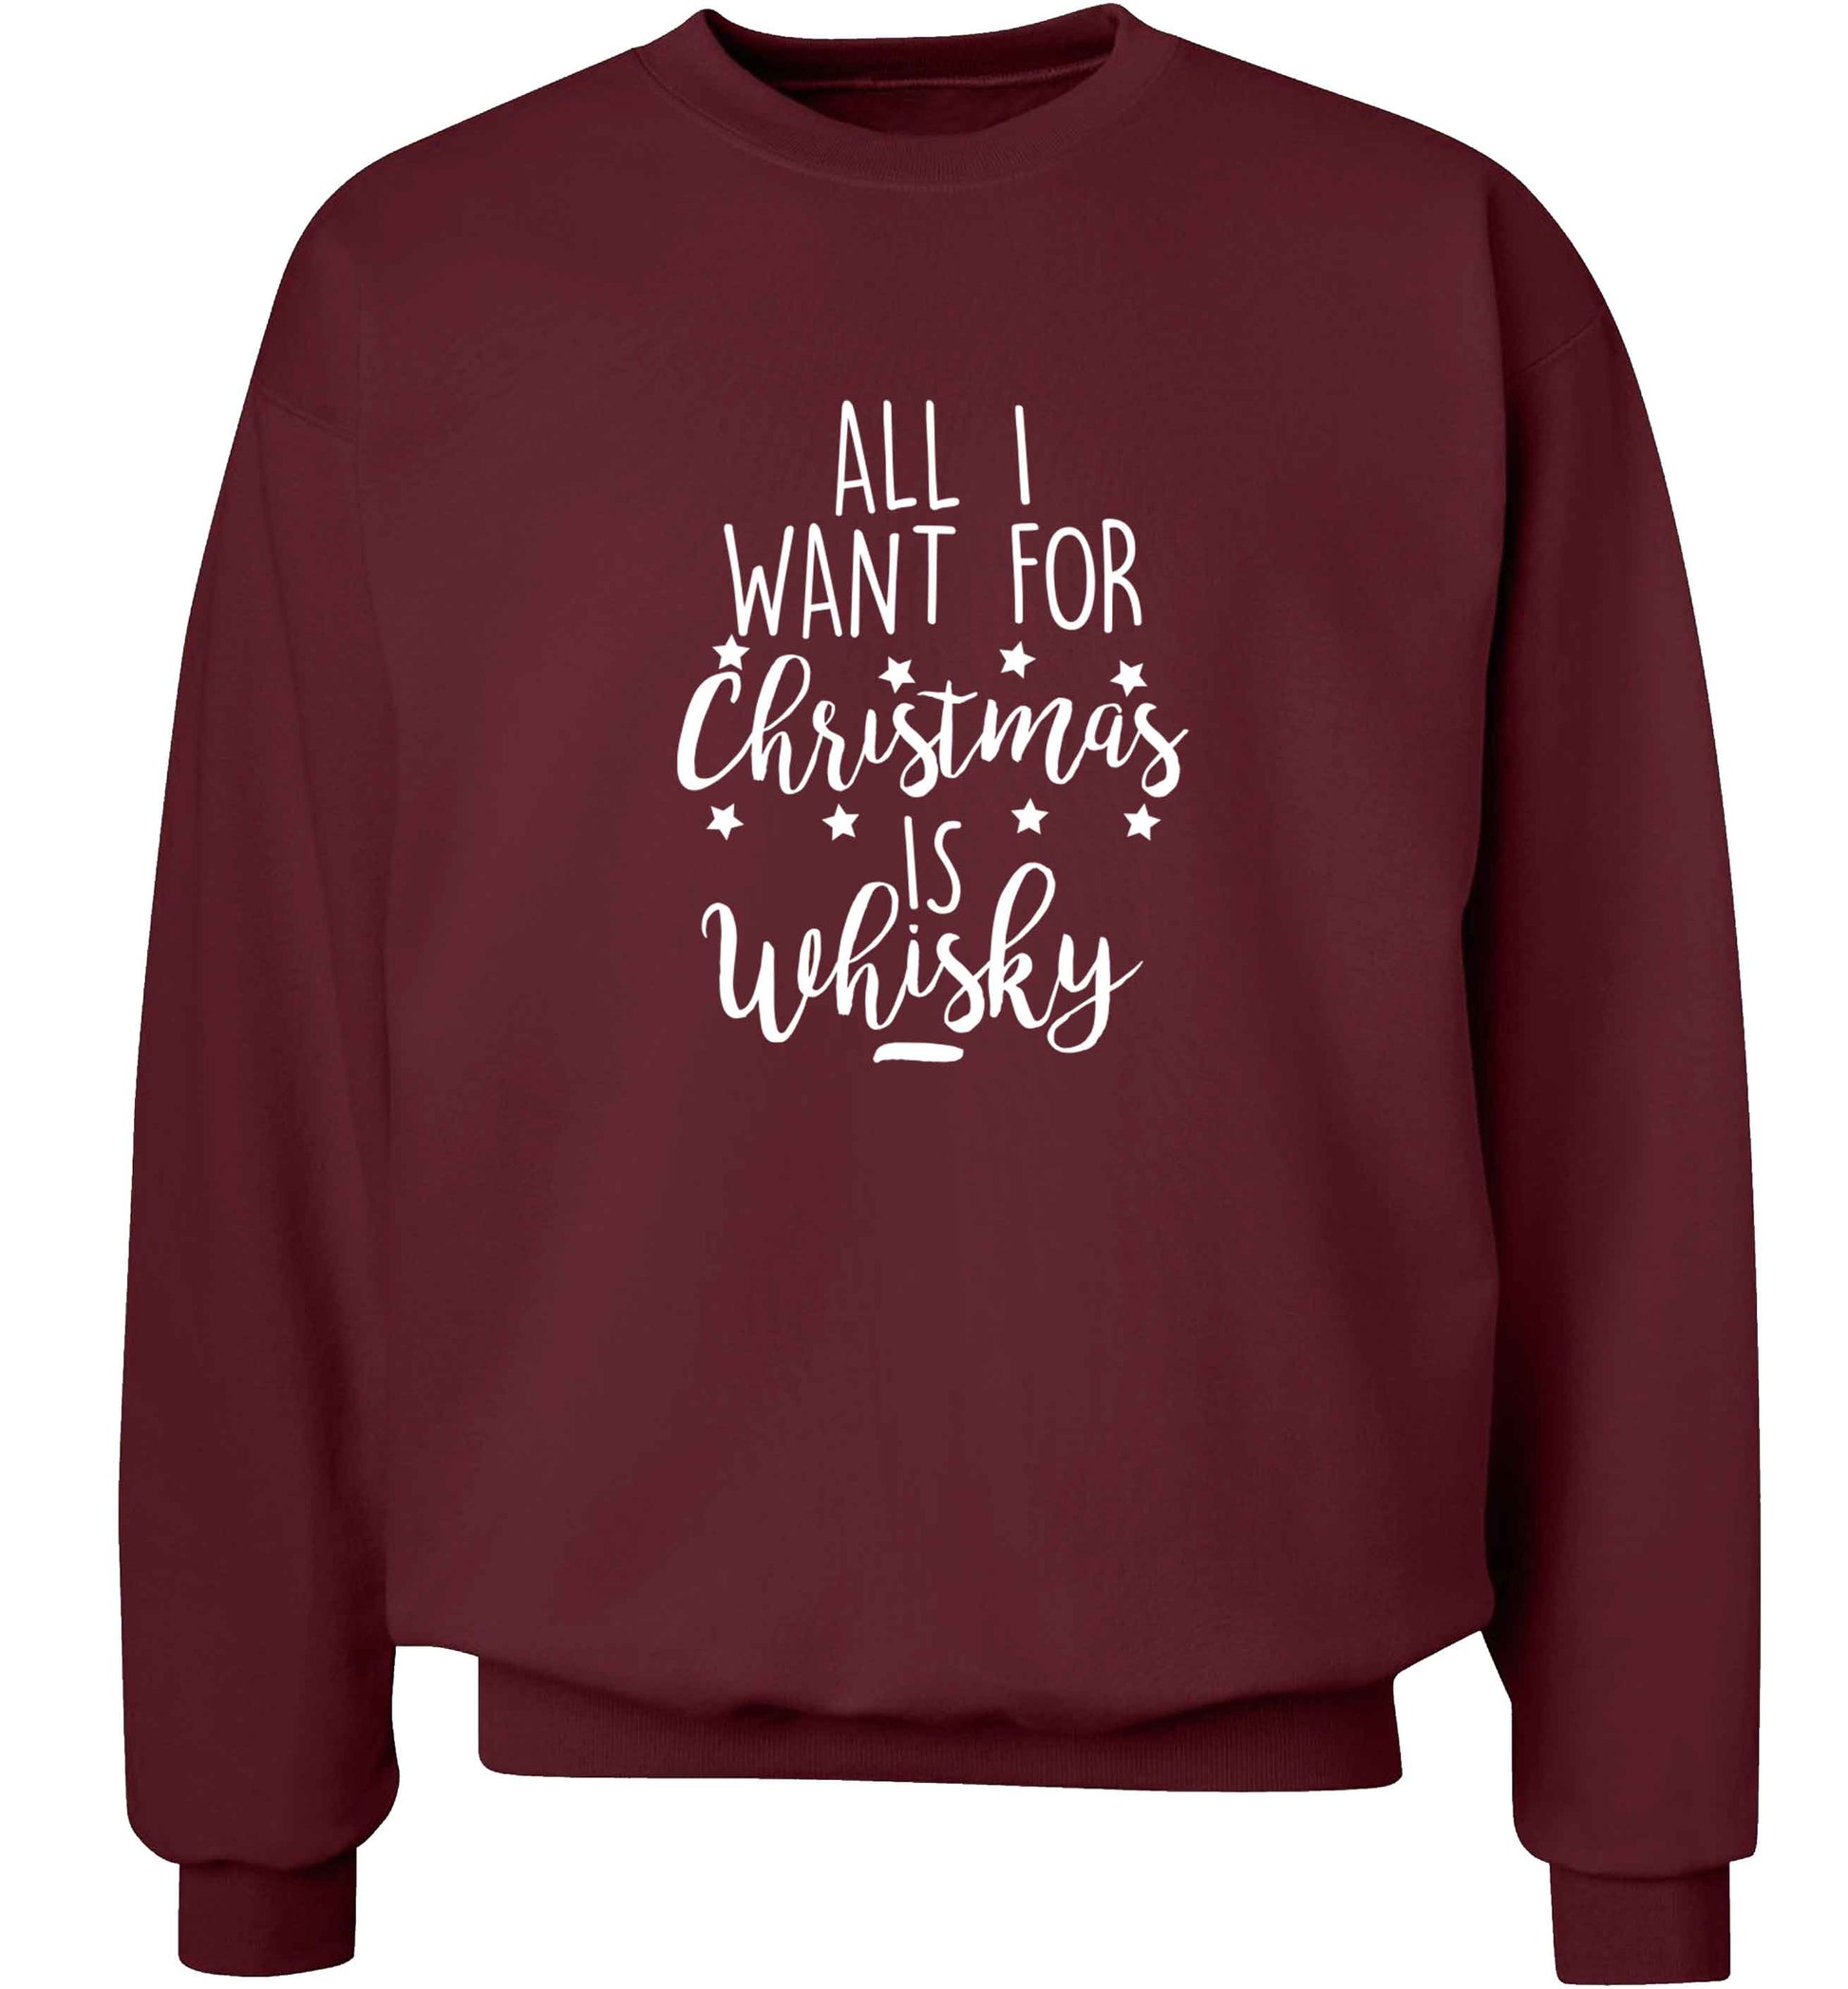 All I want for Christmas is whisky adult's unisex maroon sweater 2XL